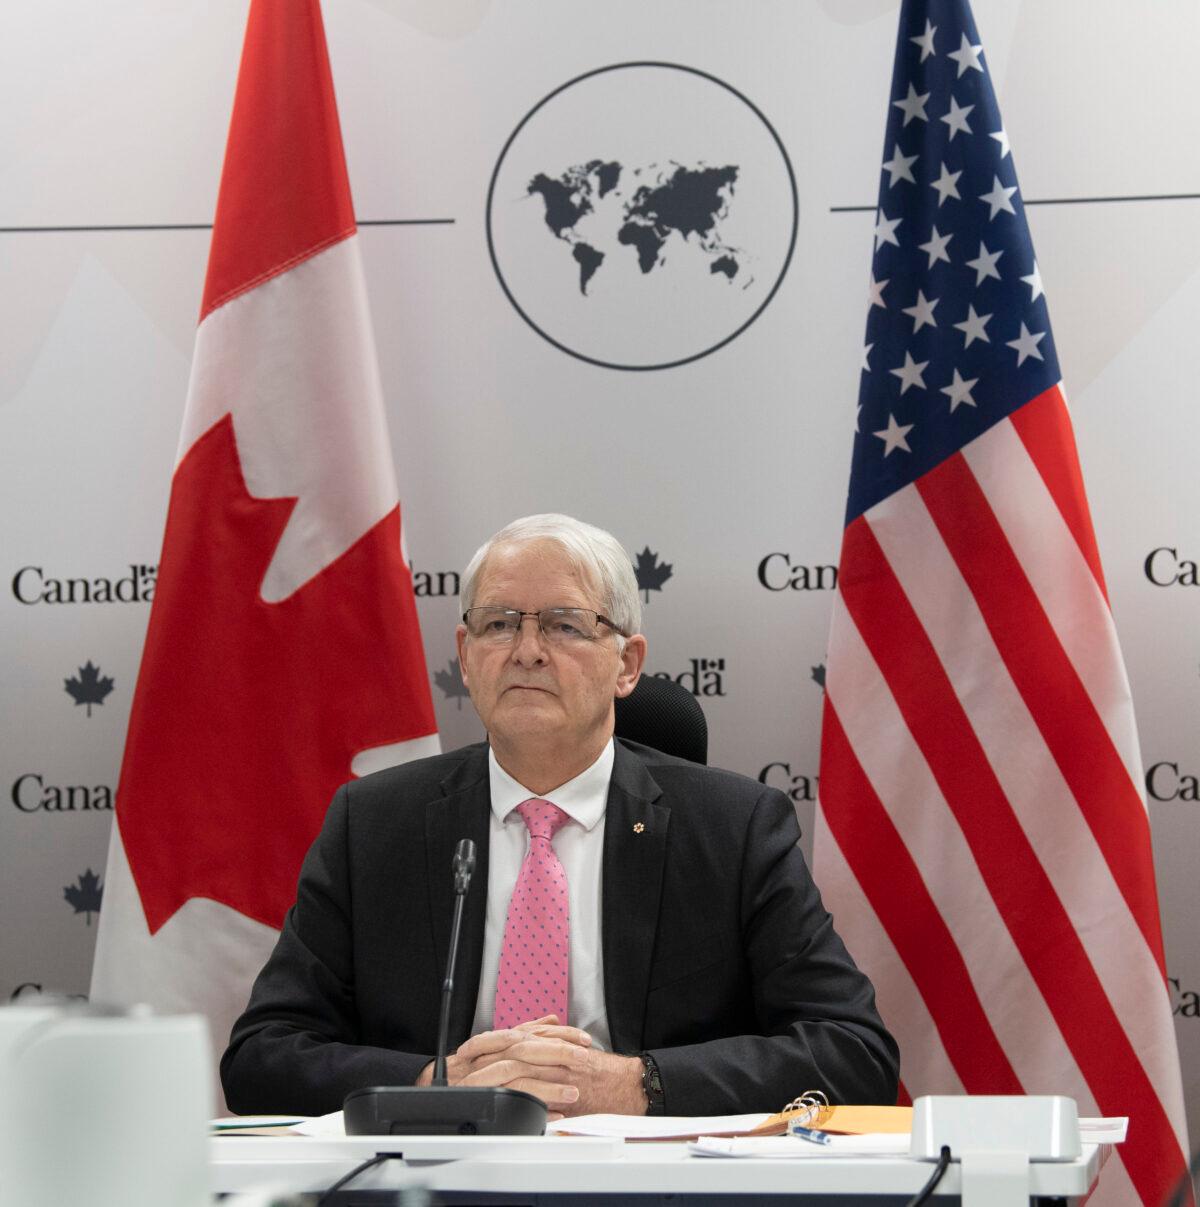 Foreign Affairs Minister Marc Garneau waits for a virtual meeting to begin with U.S. Secretary of State Antony Blinken in Ottawa on Feb. 26, 2021. (Adrian Wyld/The Canadian Press)